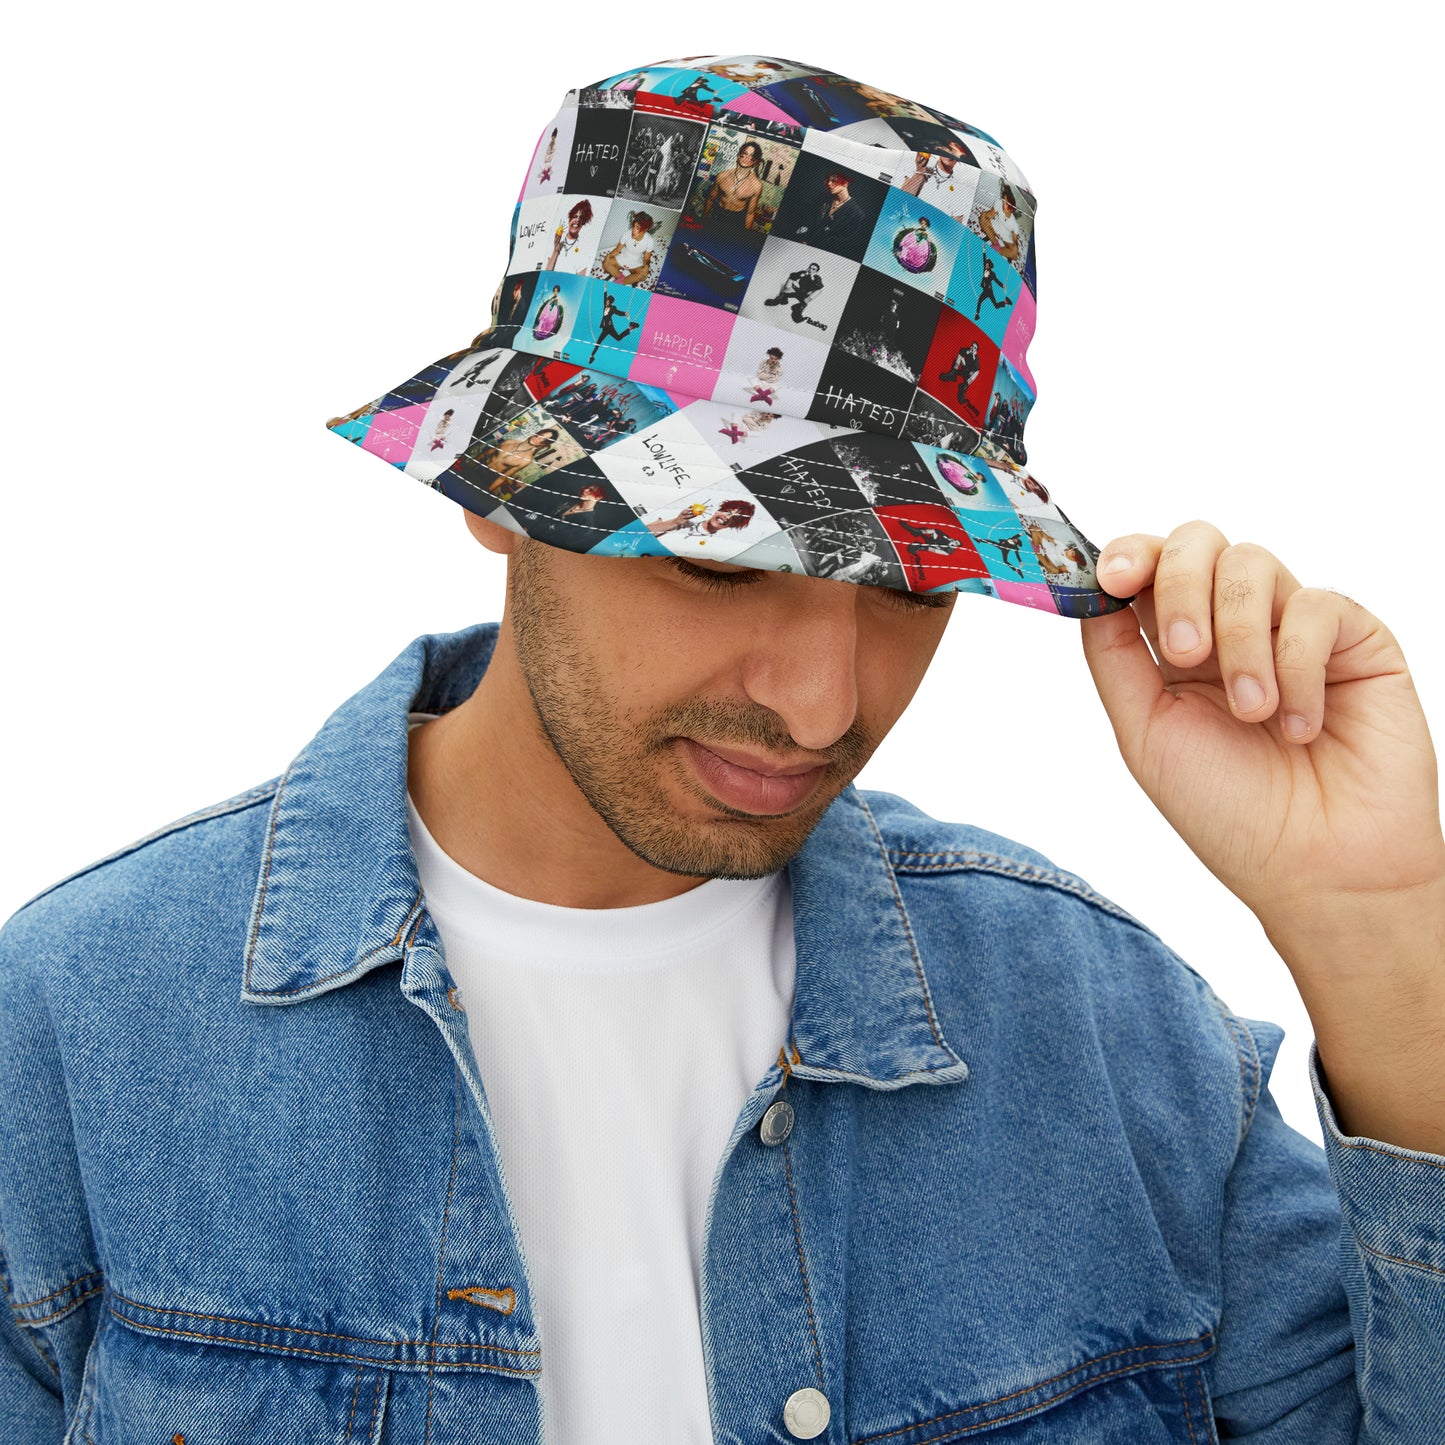 YUNGBLUD Album Cover Art Collage Bucket Hat